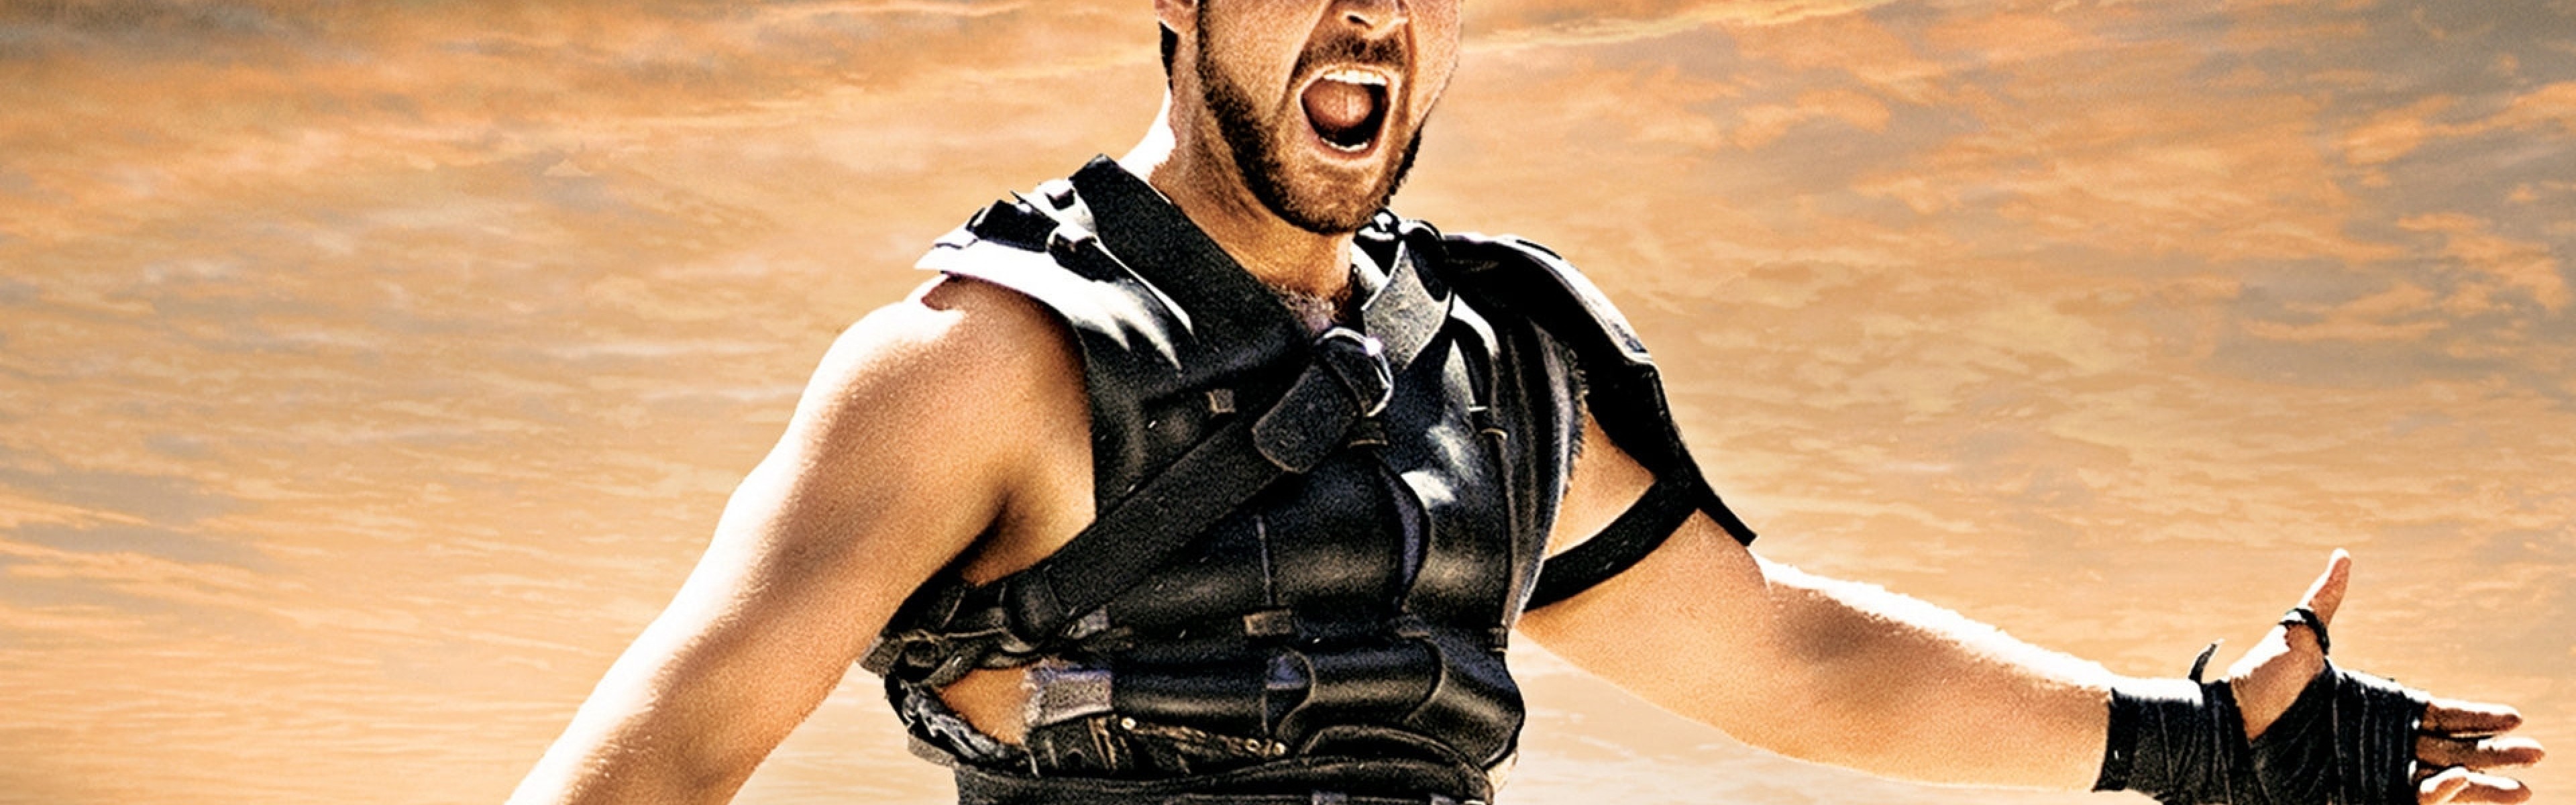 3840x1200  Wallpaper gladiator, russell crowe, maximus, warrior, shout